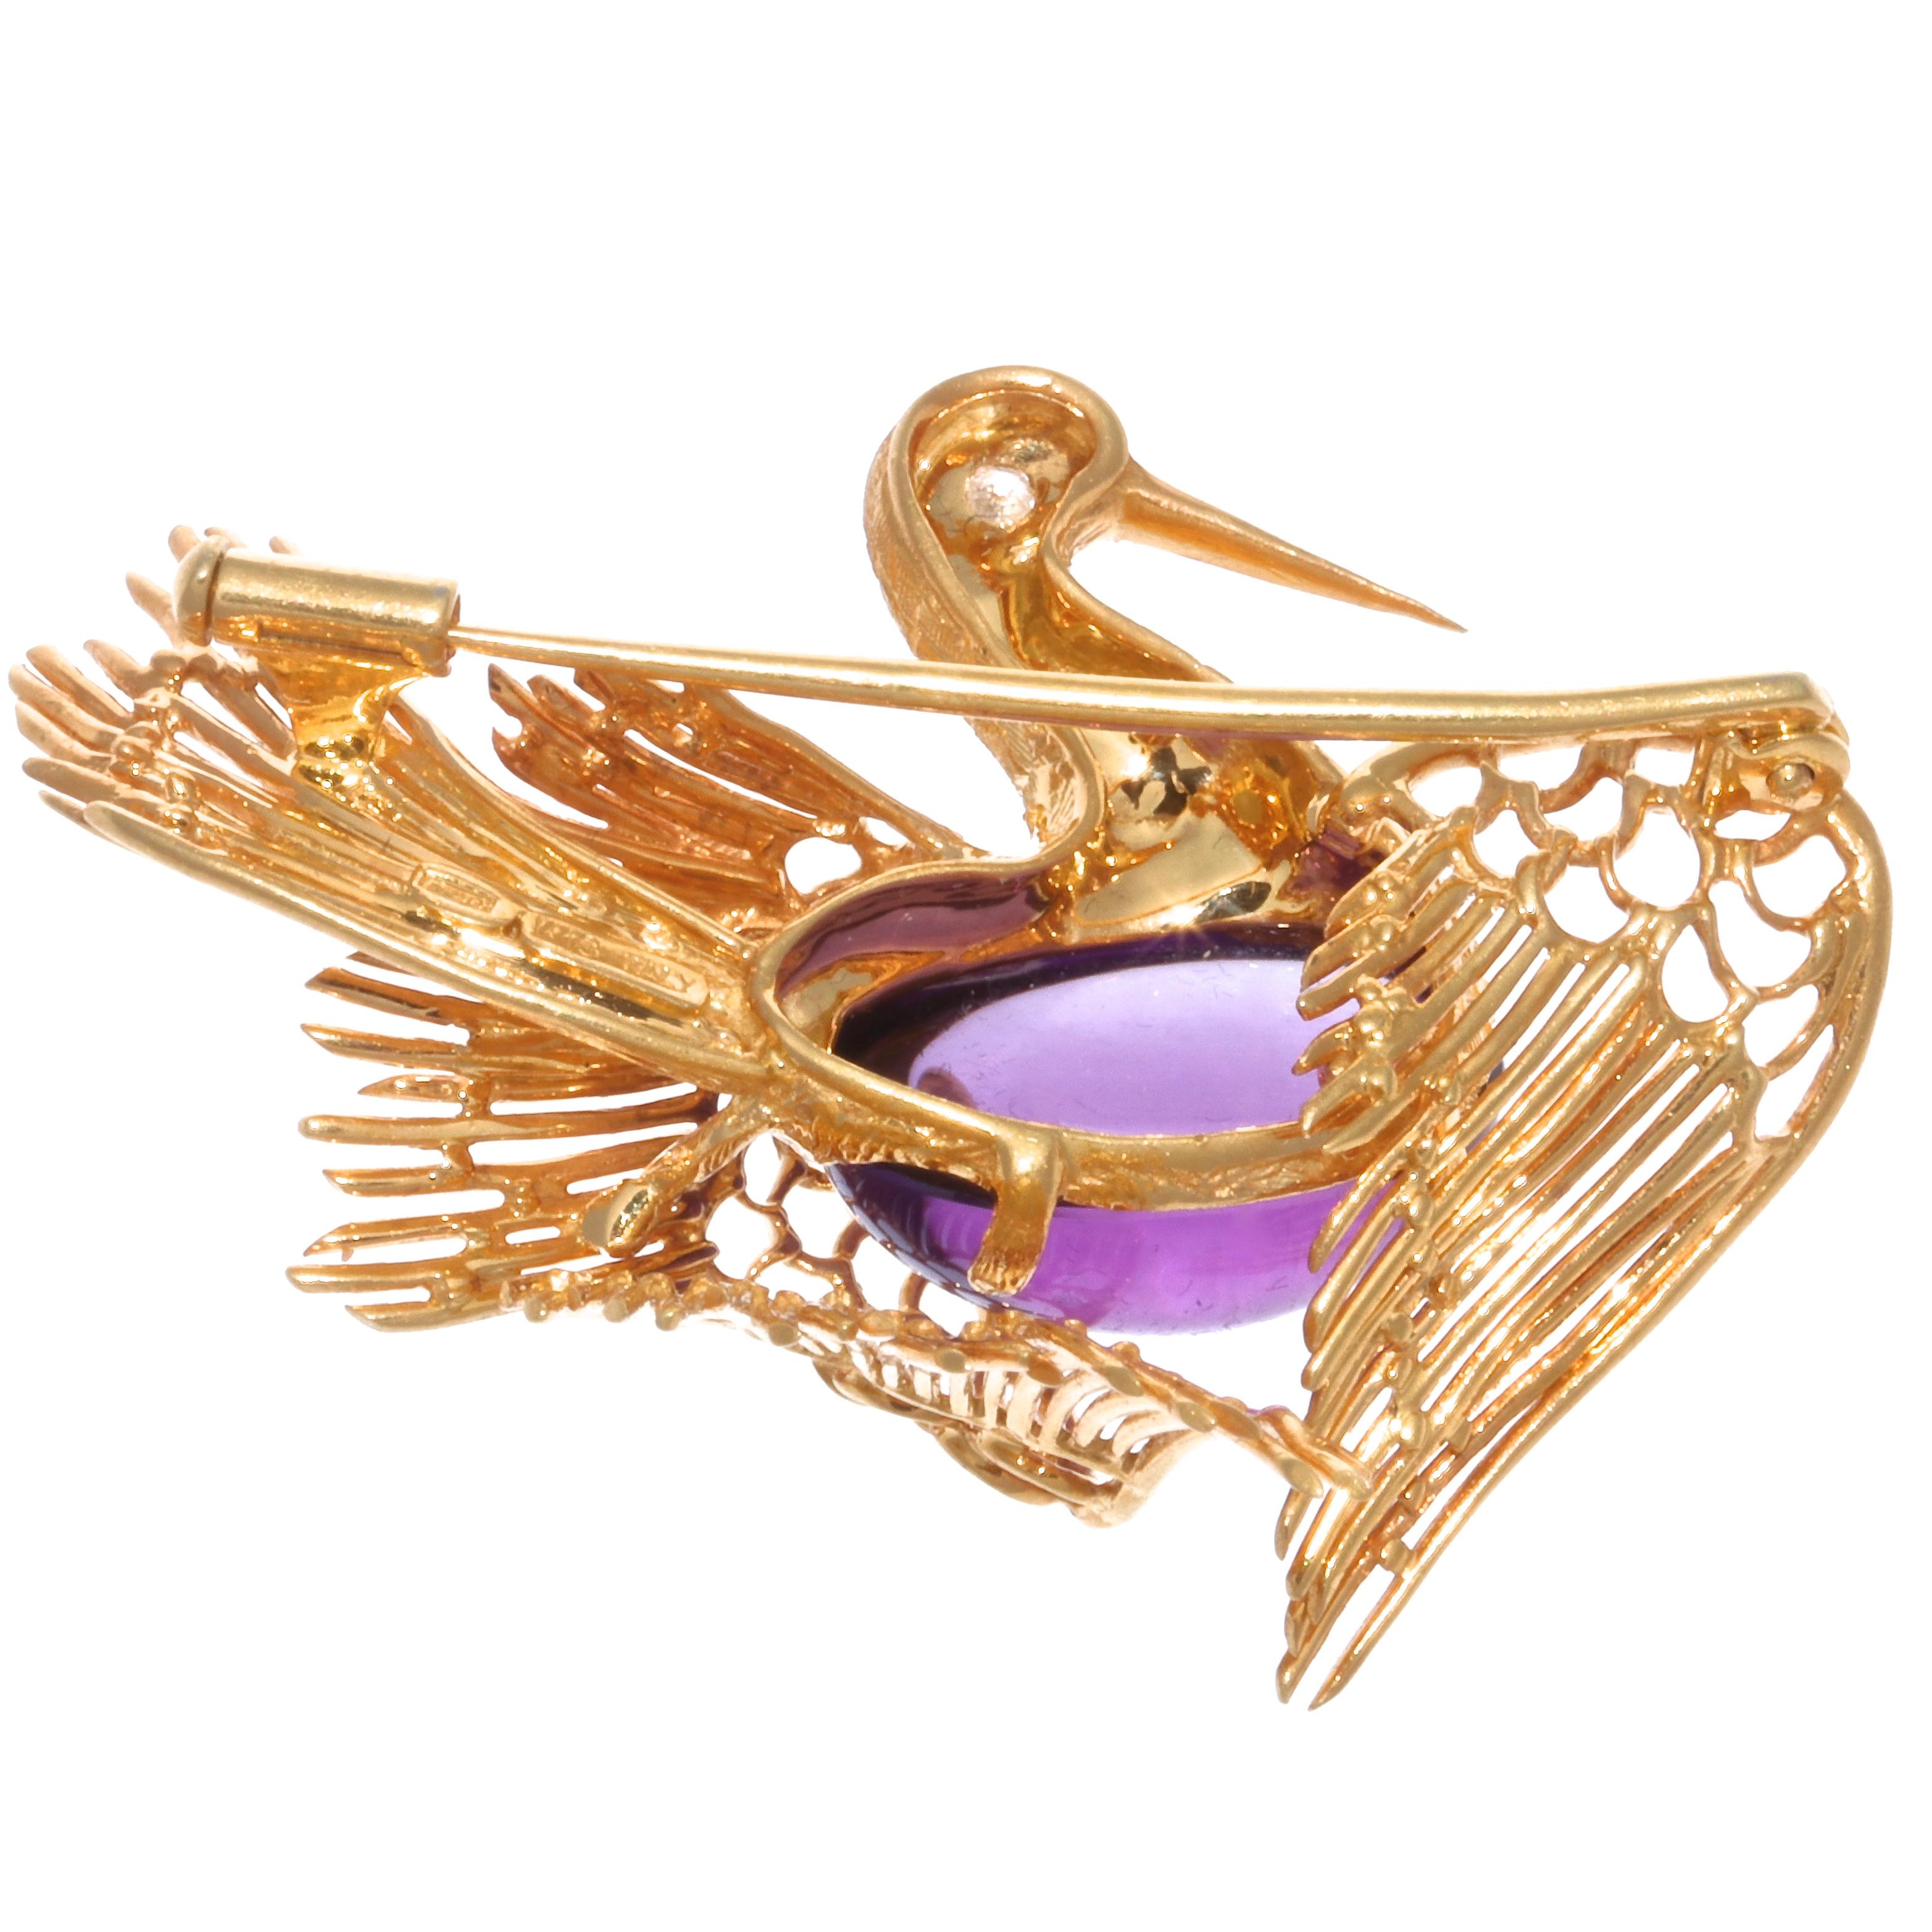 From the Cartier menagerie, an interesting and graceful bird brooch, that would be a great addition to your signed collection. Hallmarked Cartier Italy. The beautiful, vibrant amethyst cabochon is approximately 11.25 carats with a single cut diamond